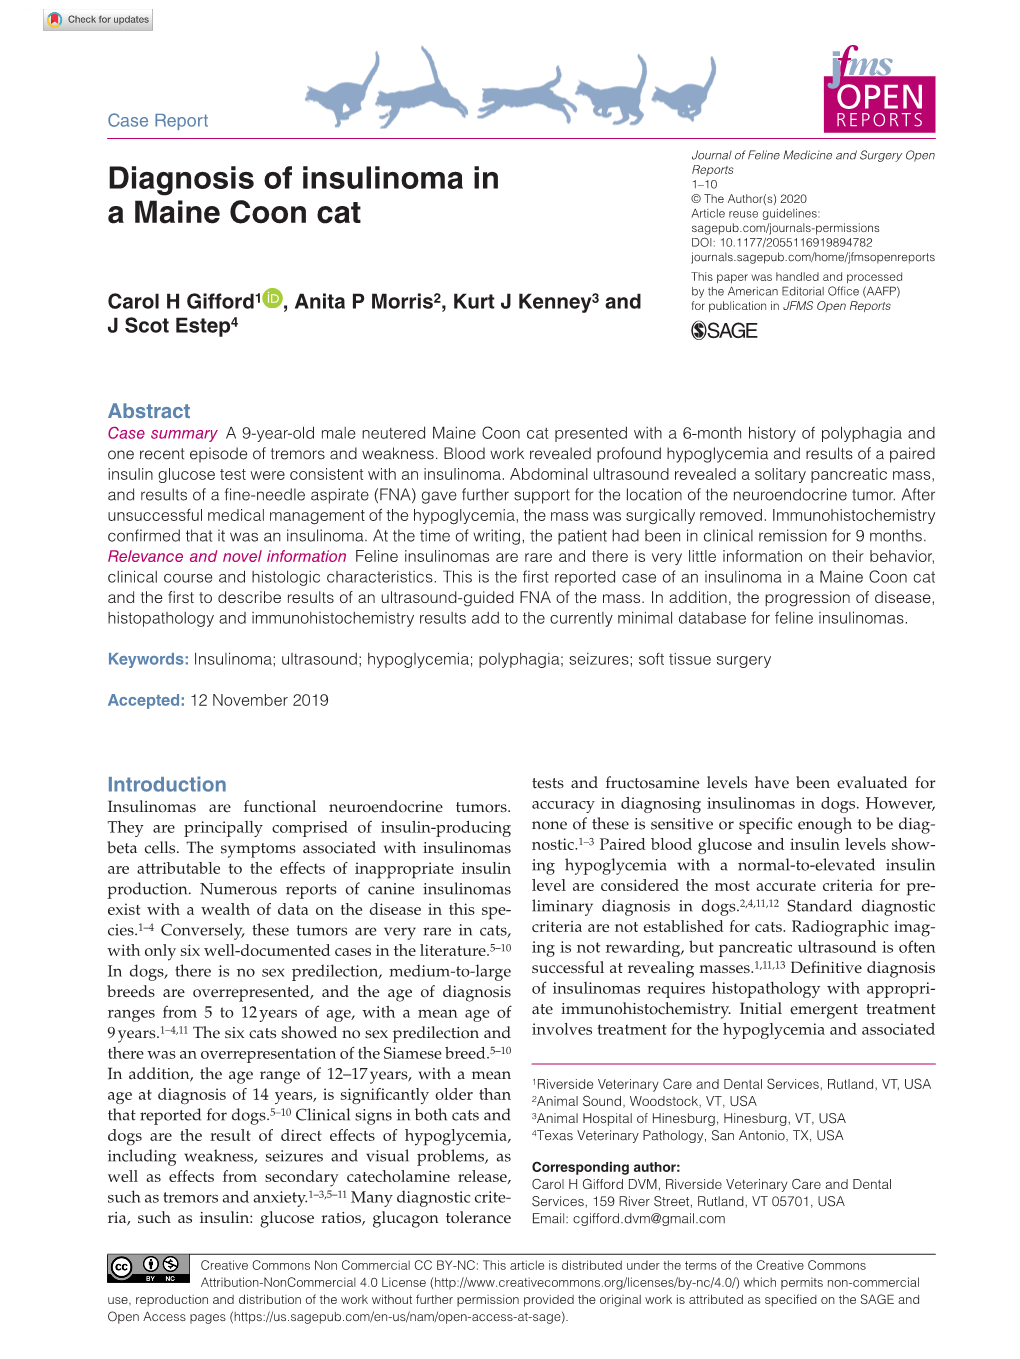 Diagnosis of Insulinoma in a Maine Coon